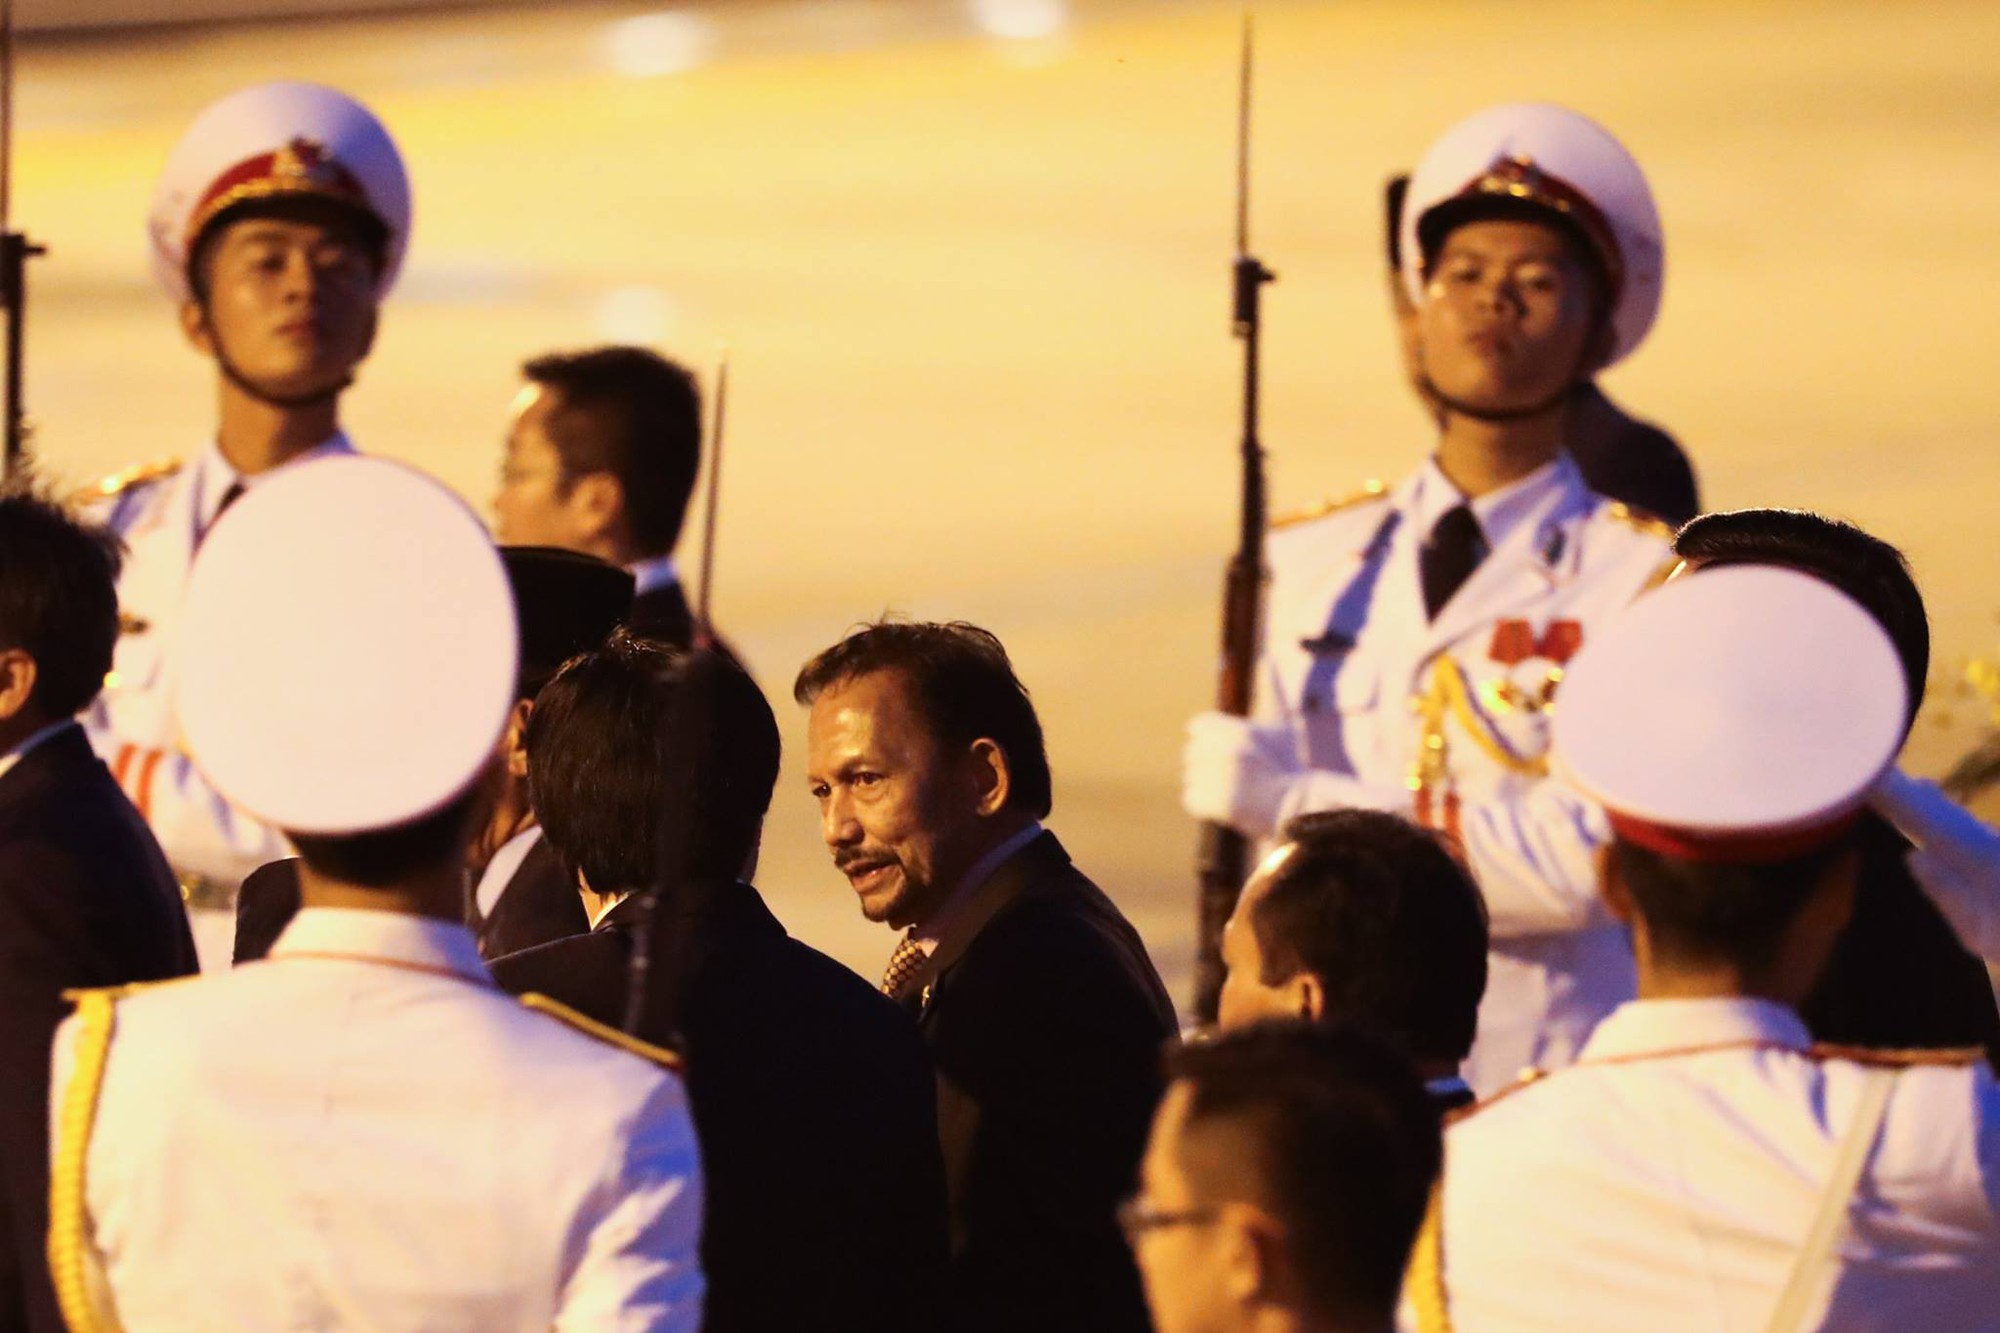 Hassanal Bolkiah, the Sultan of Brunei, is welcomed by Vietnamese guards of honor after arriving in Da Nang. Photo: Tuoi Tre